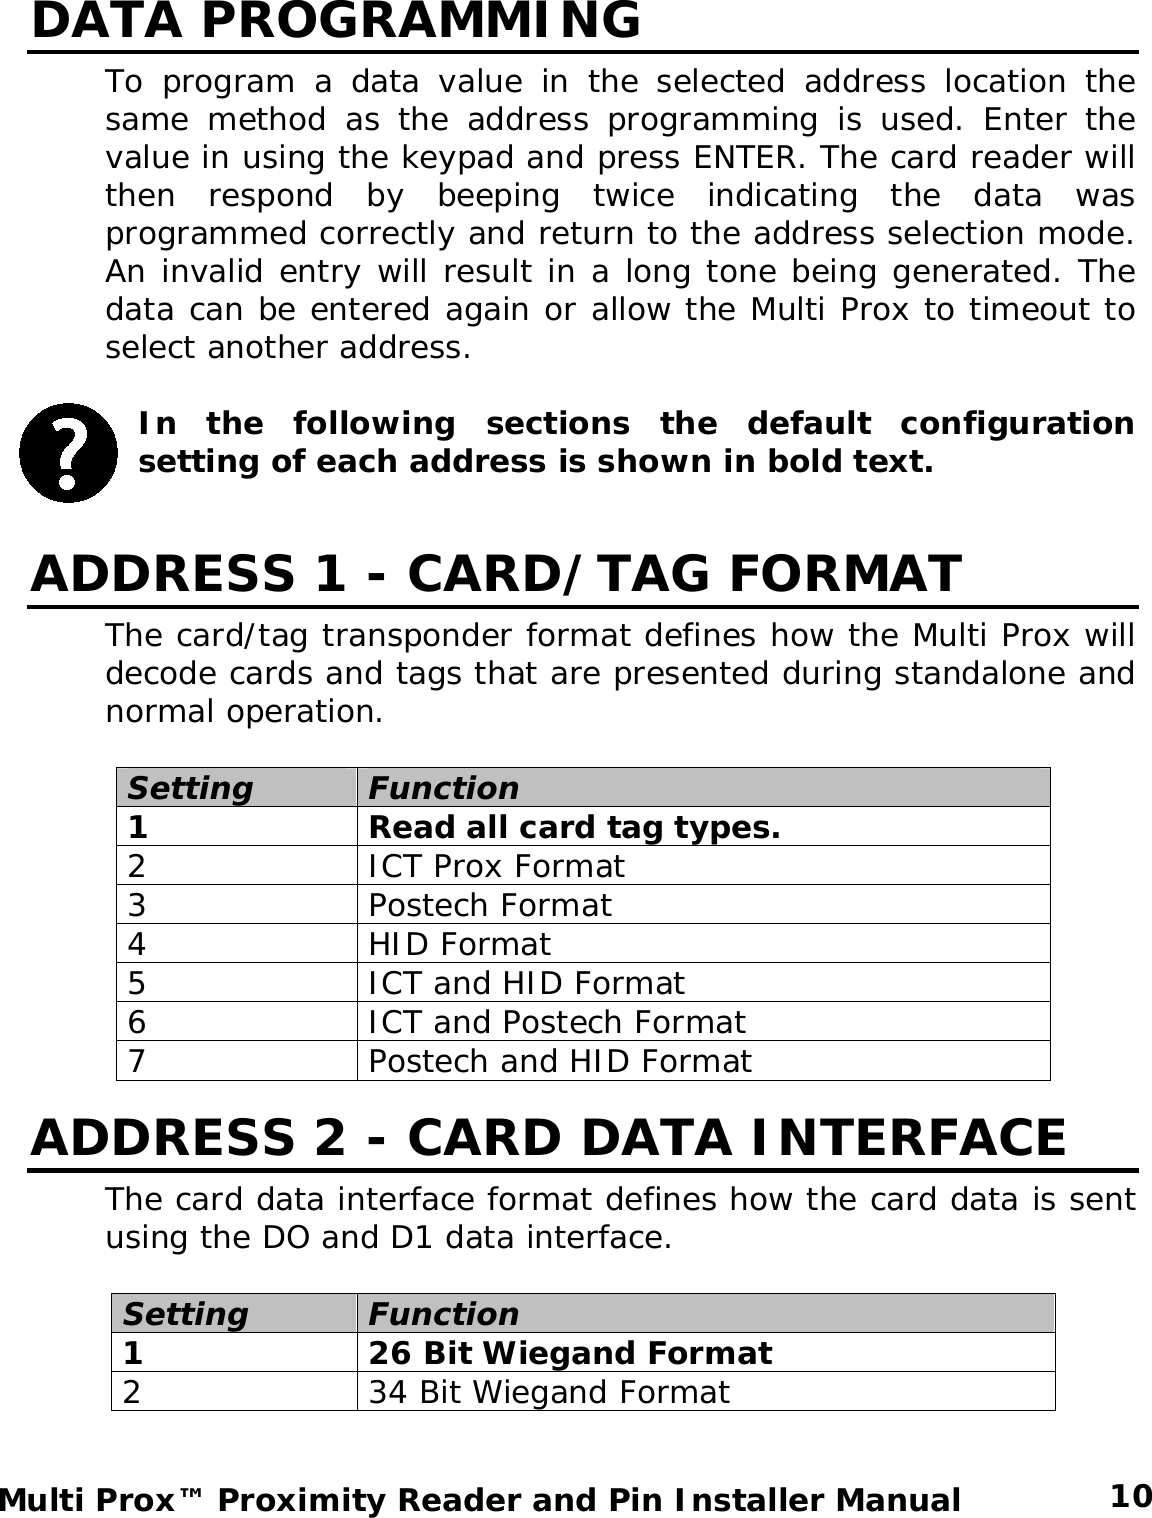 DATA PROGRAMMING To program a data value in the selected address location the same method as the address programming is used. Enter the value in using the keypad and press ENTER. The card reader will then respond by beeping twice indicating the data was programmed correctly and return to the address selection mode. An invalid entry will result in a long tone being generated. The data can be entered again or allow the Multi Prox to timeout to select another address.   In the following sections the default configuration setting of each address is shown in bold text.    ADDRESS 1 - CARD/TAG FORMAT The card/tag transponder format defines how the Multi Prox will decode cards and tags that are presented during standalone and normal operation.  Setting Function 1  Read all card tag types. 2  ICT Prox Format 3 Postech Format 4 HID Format 5  ICT and HID Format 6  ICT and Postech Format 7  Postech and HID Format ADDRESS 2 - CARD DATA INTERFACE The card data interface format defines how the card data is sent using the DO and D1 data interface.  Setting Function 1  26 Bit Wiegand Format 2  34 Bit Wiegand Format  10 Multi Prox™ Proximity Reader and Pin Installer Manual 